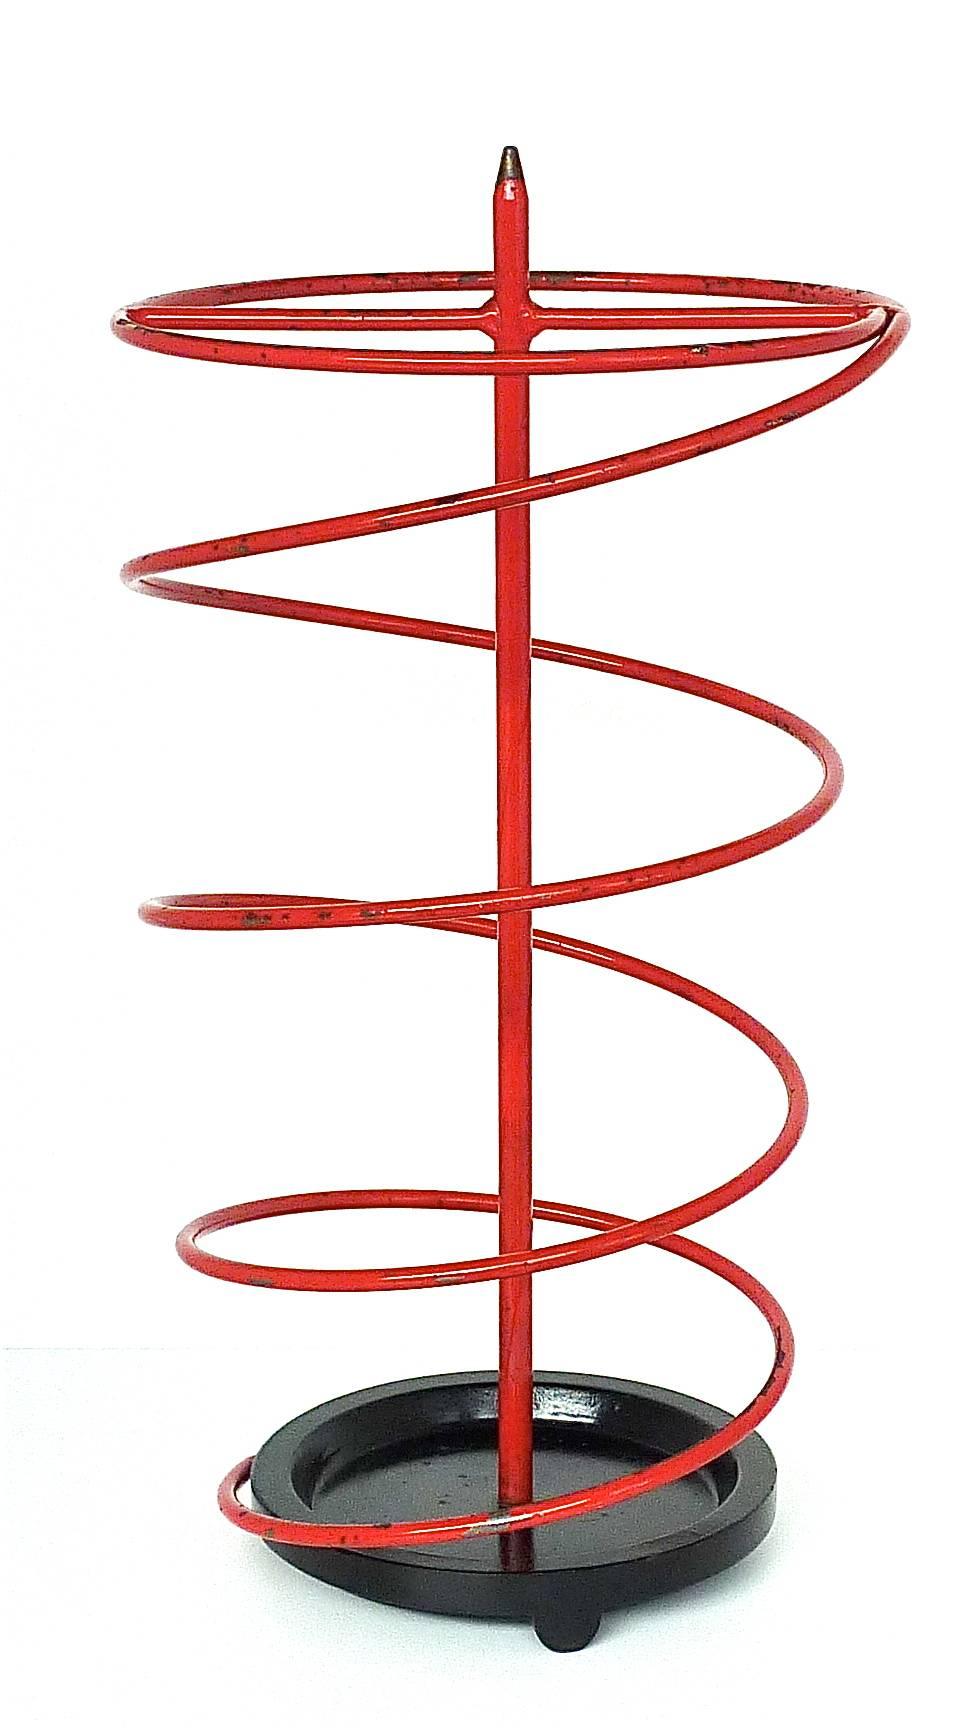 Sculptural rare French modernist iron umbrella stand in spiral shape in colors red and black, France, circa 1930-1950. Heavy black iron base with impressed number 10 and a red enameled tubular iron or steel spiral with visible losses of paint. From